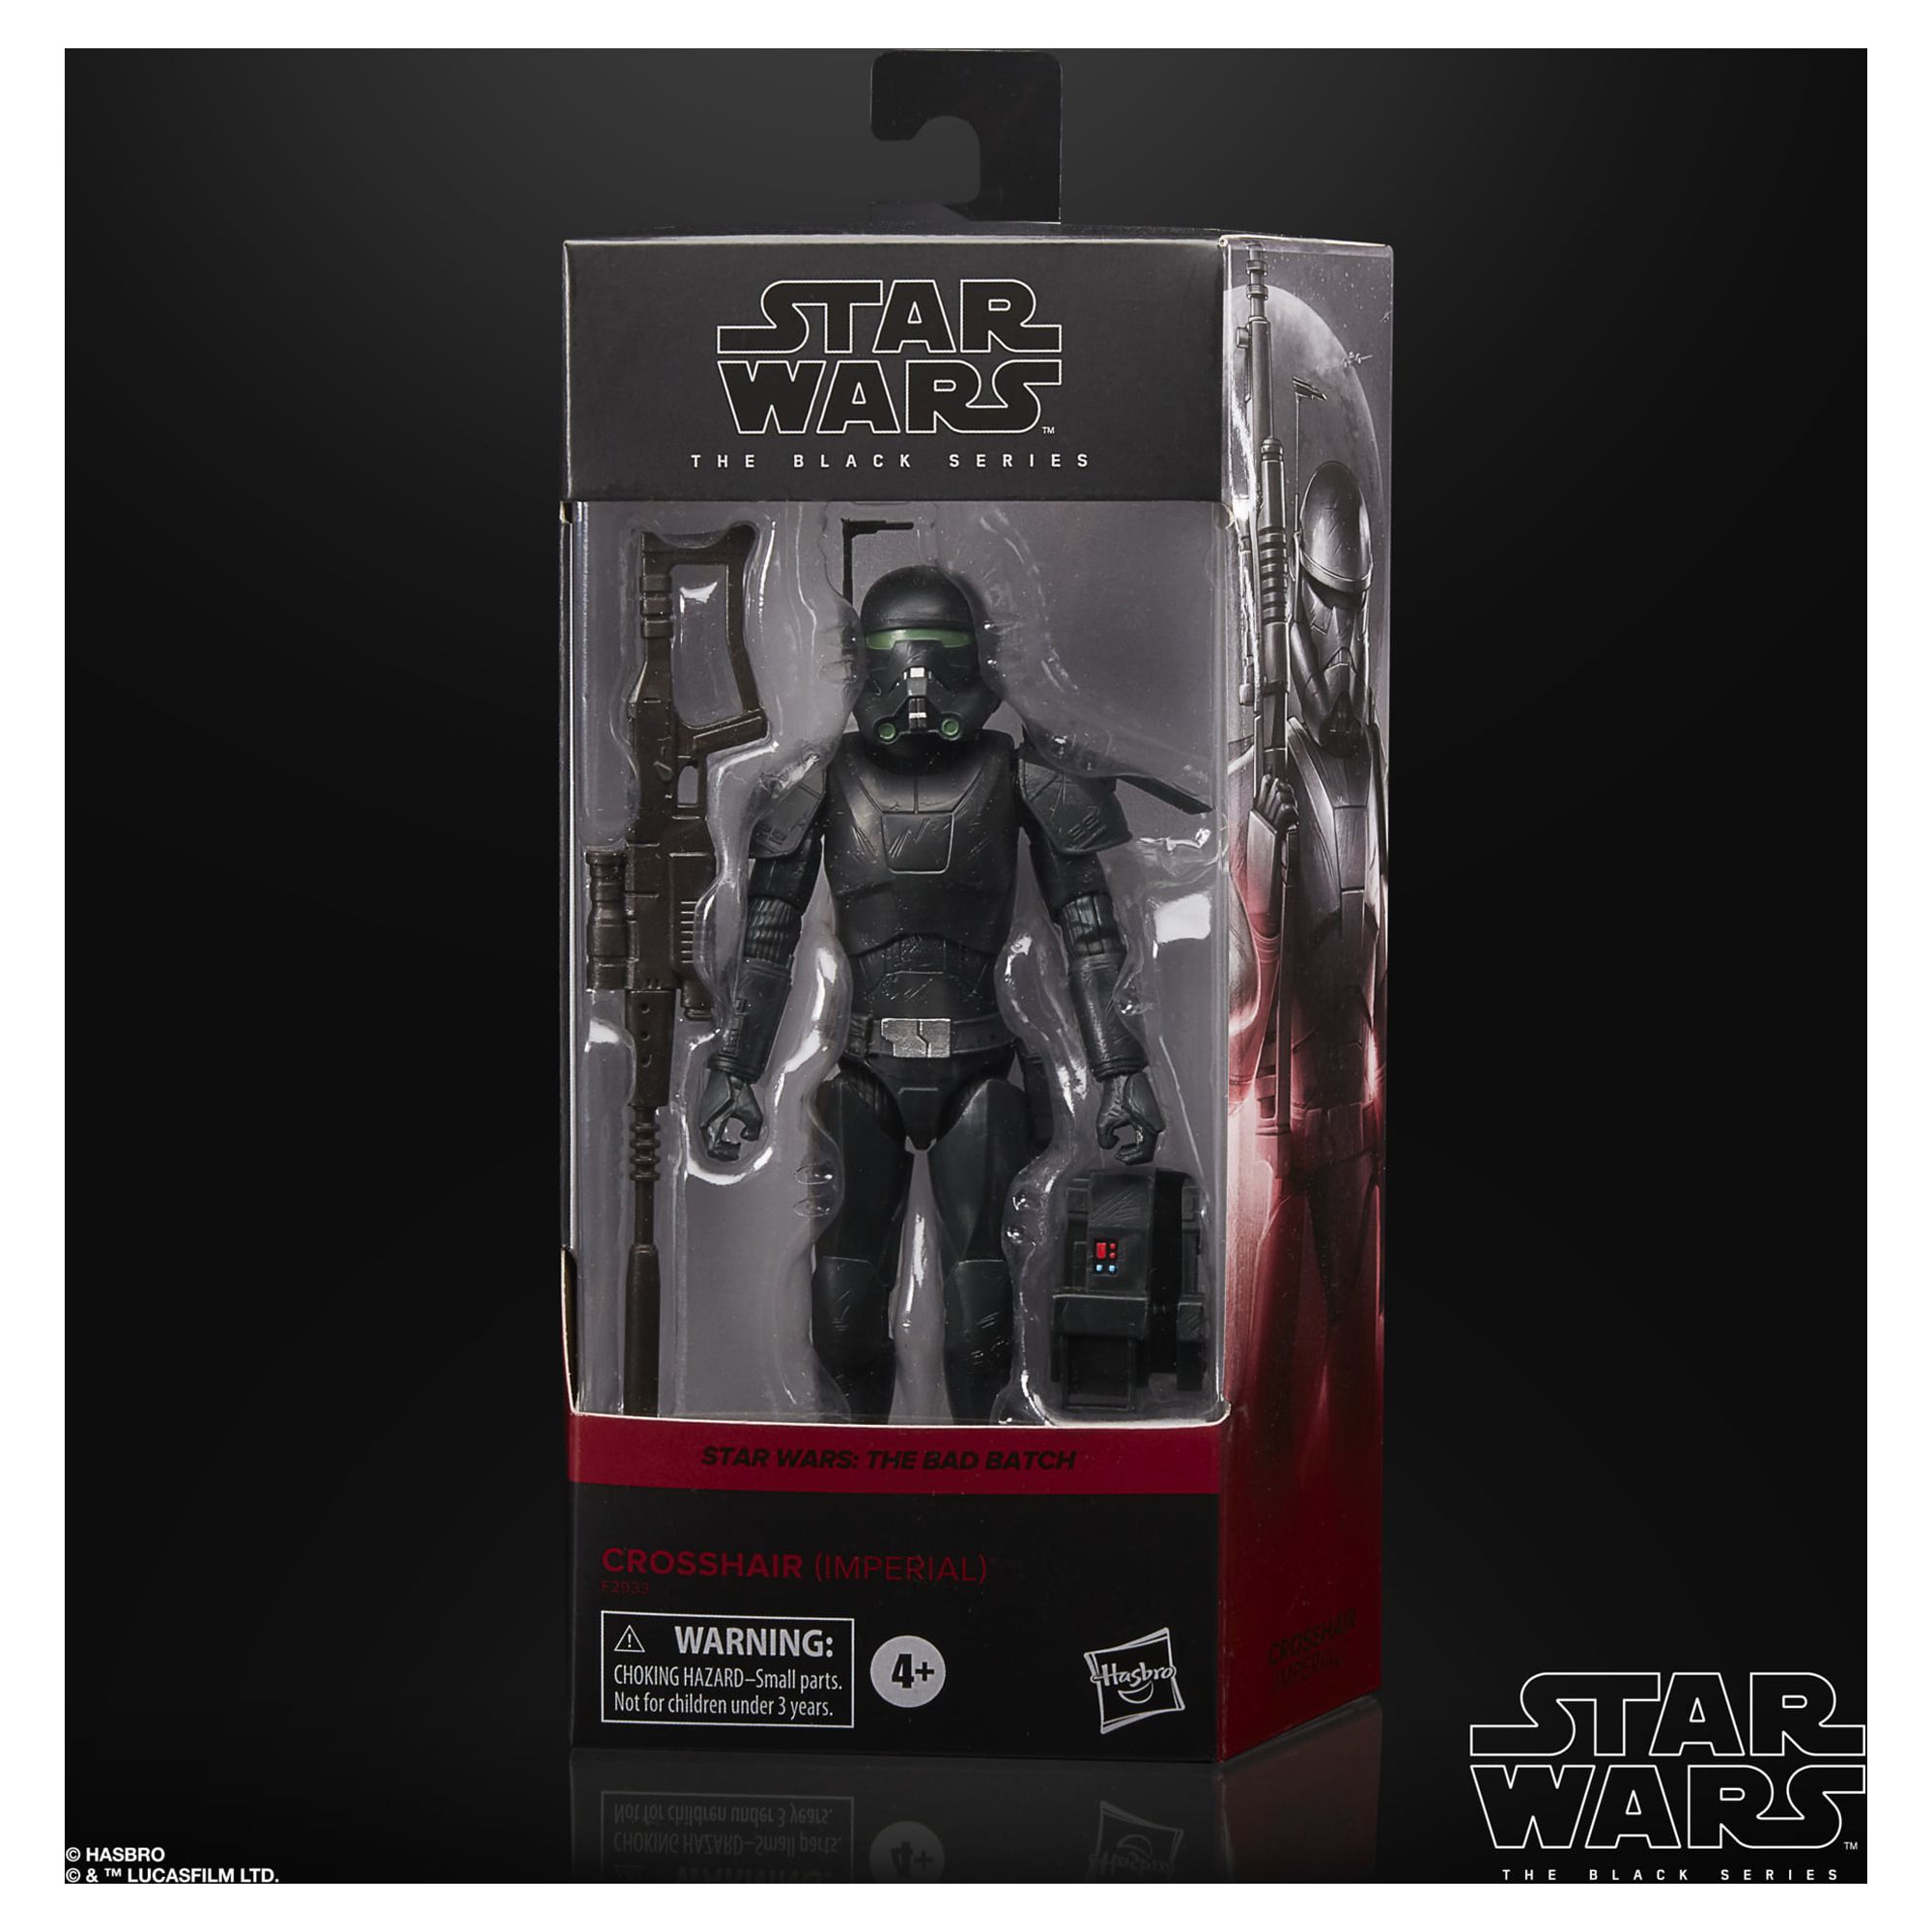 Star Wars: The Black Series Crosshair (Imperial) Kids Toy Action Figure for Boys and Girls Ages 4 5 6 7 8 and Up - image 3 of 8